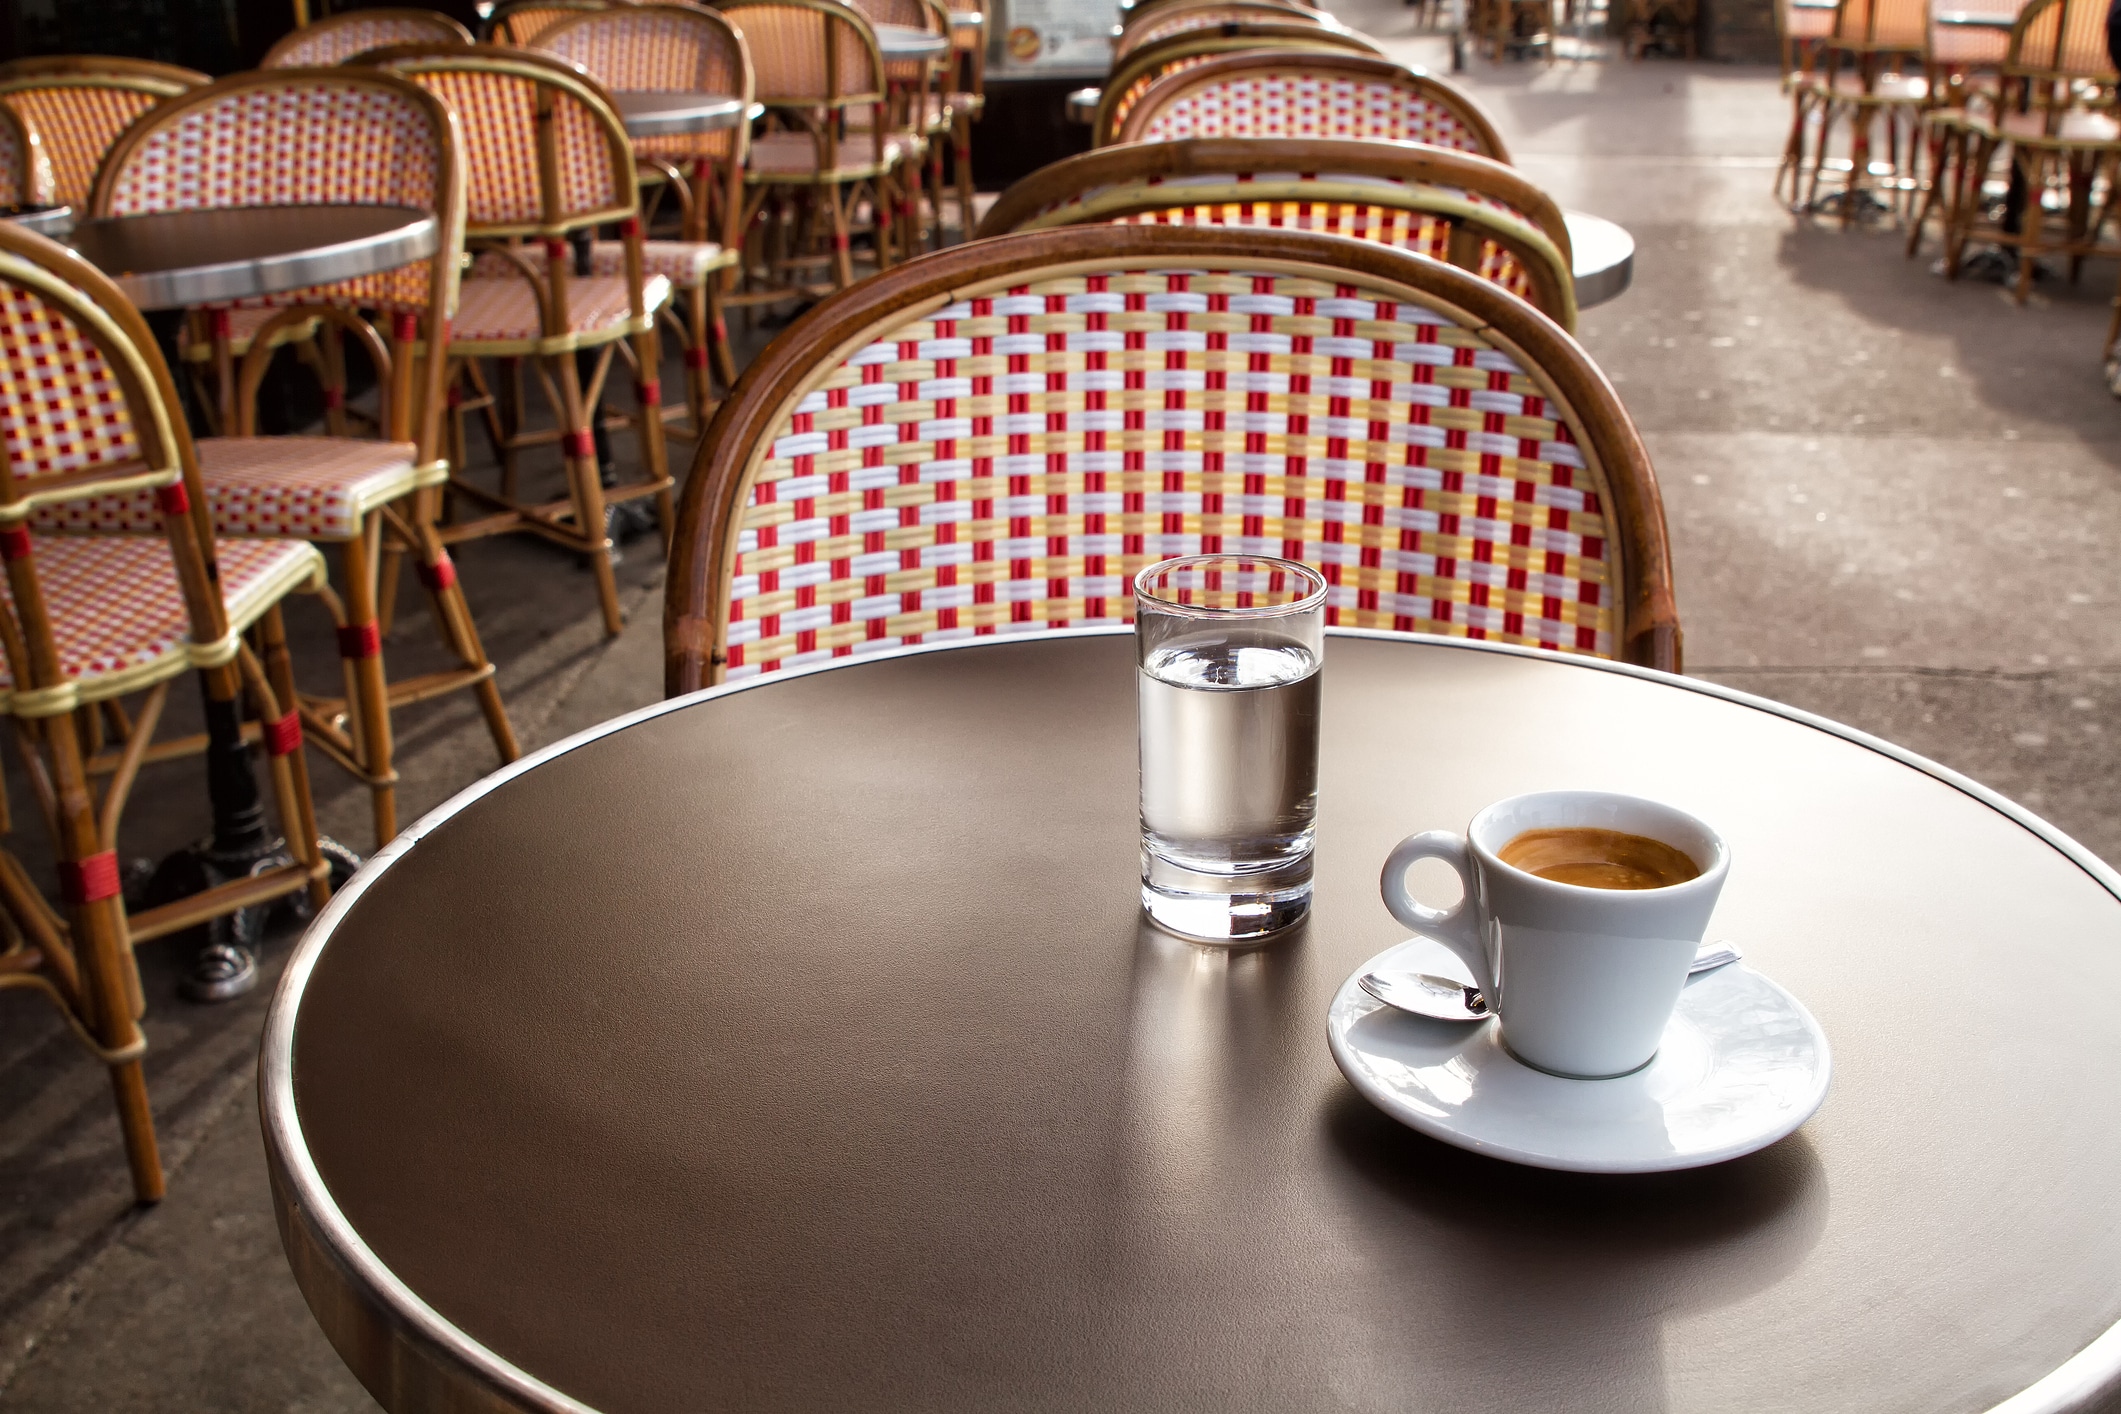 Image of coffee and water on a table